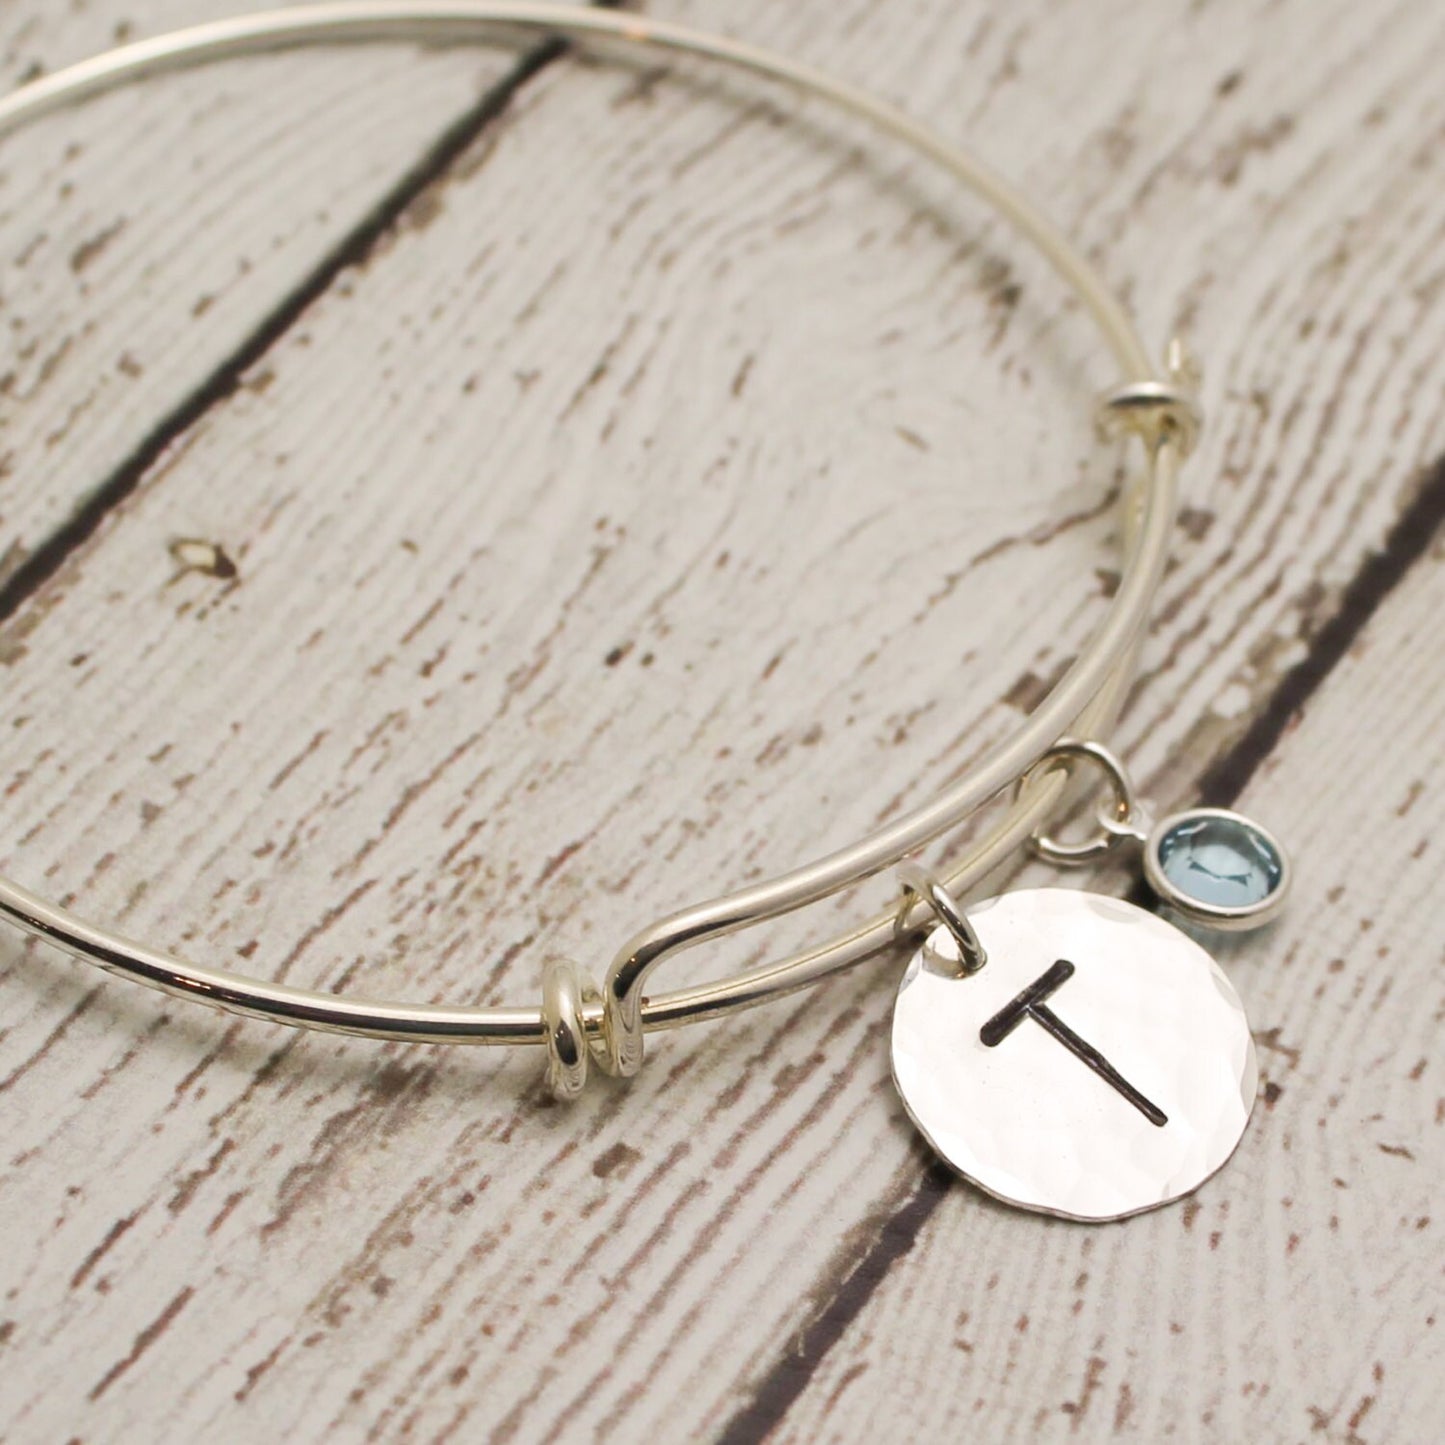 Initial and Birthstone Bangle Bracelet, Sterling Silver, Stainless Steel, Personalized